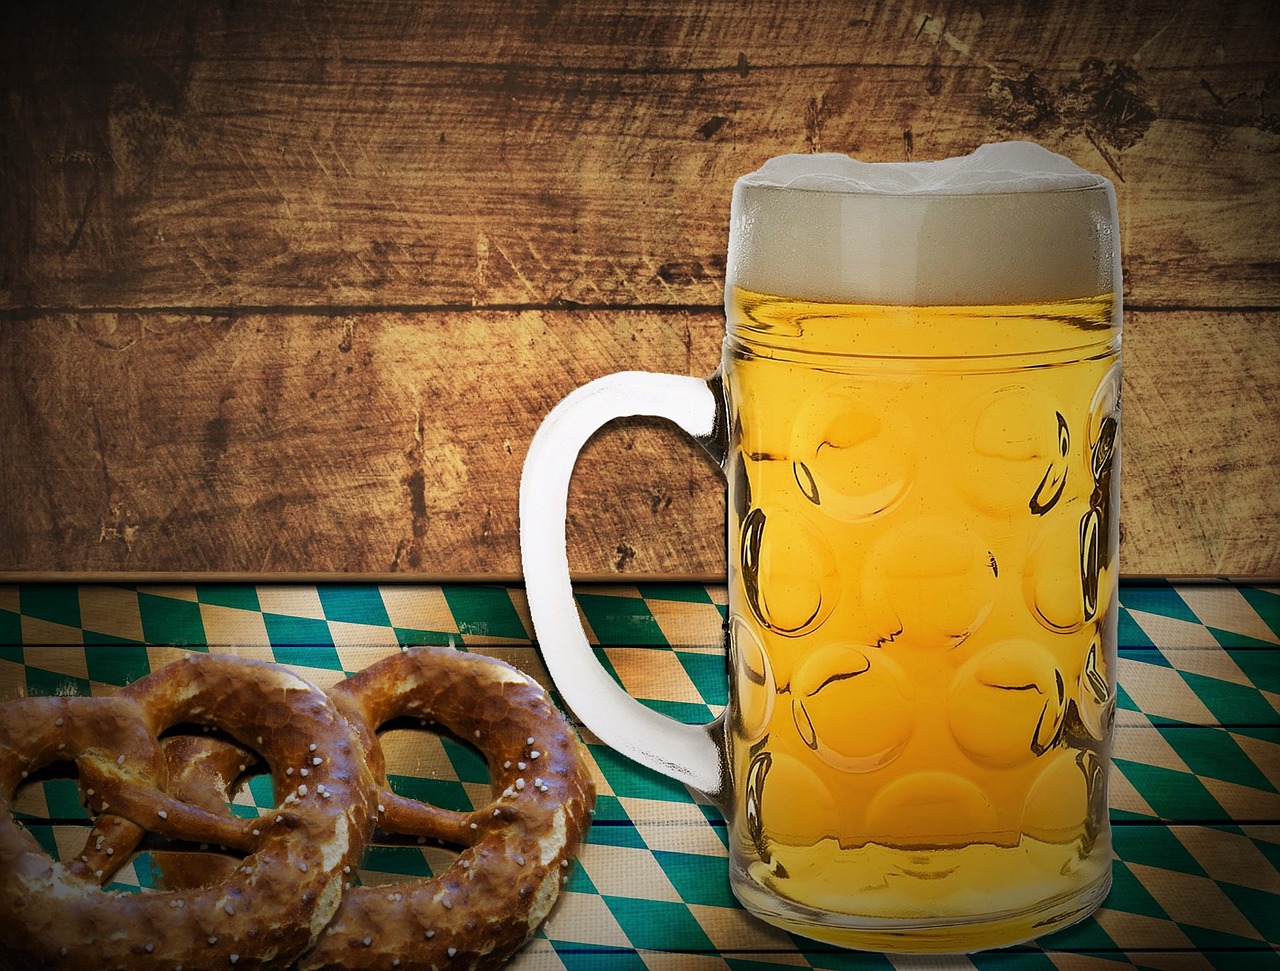 The Best ‘Oktoberfest’ to Hit NH is Happening in Concord on September 28